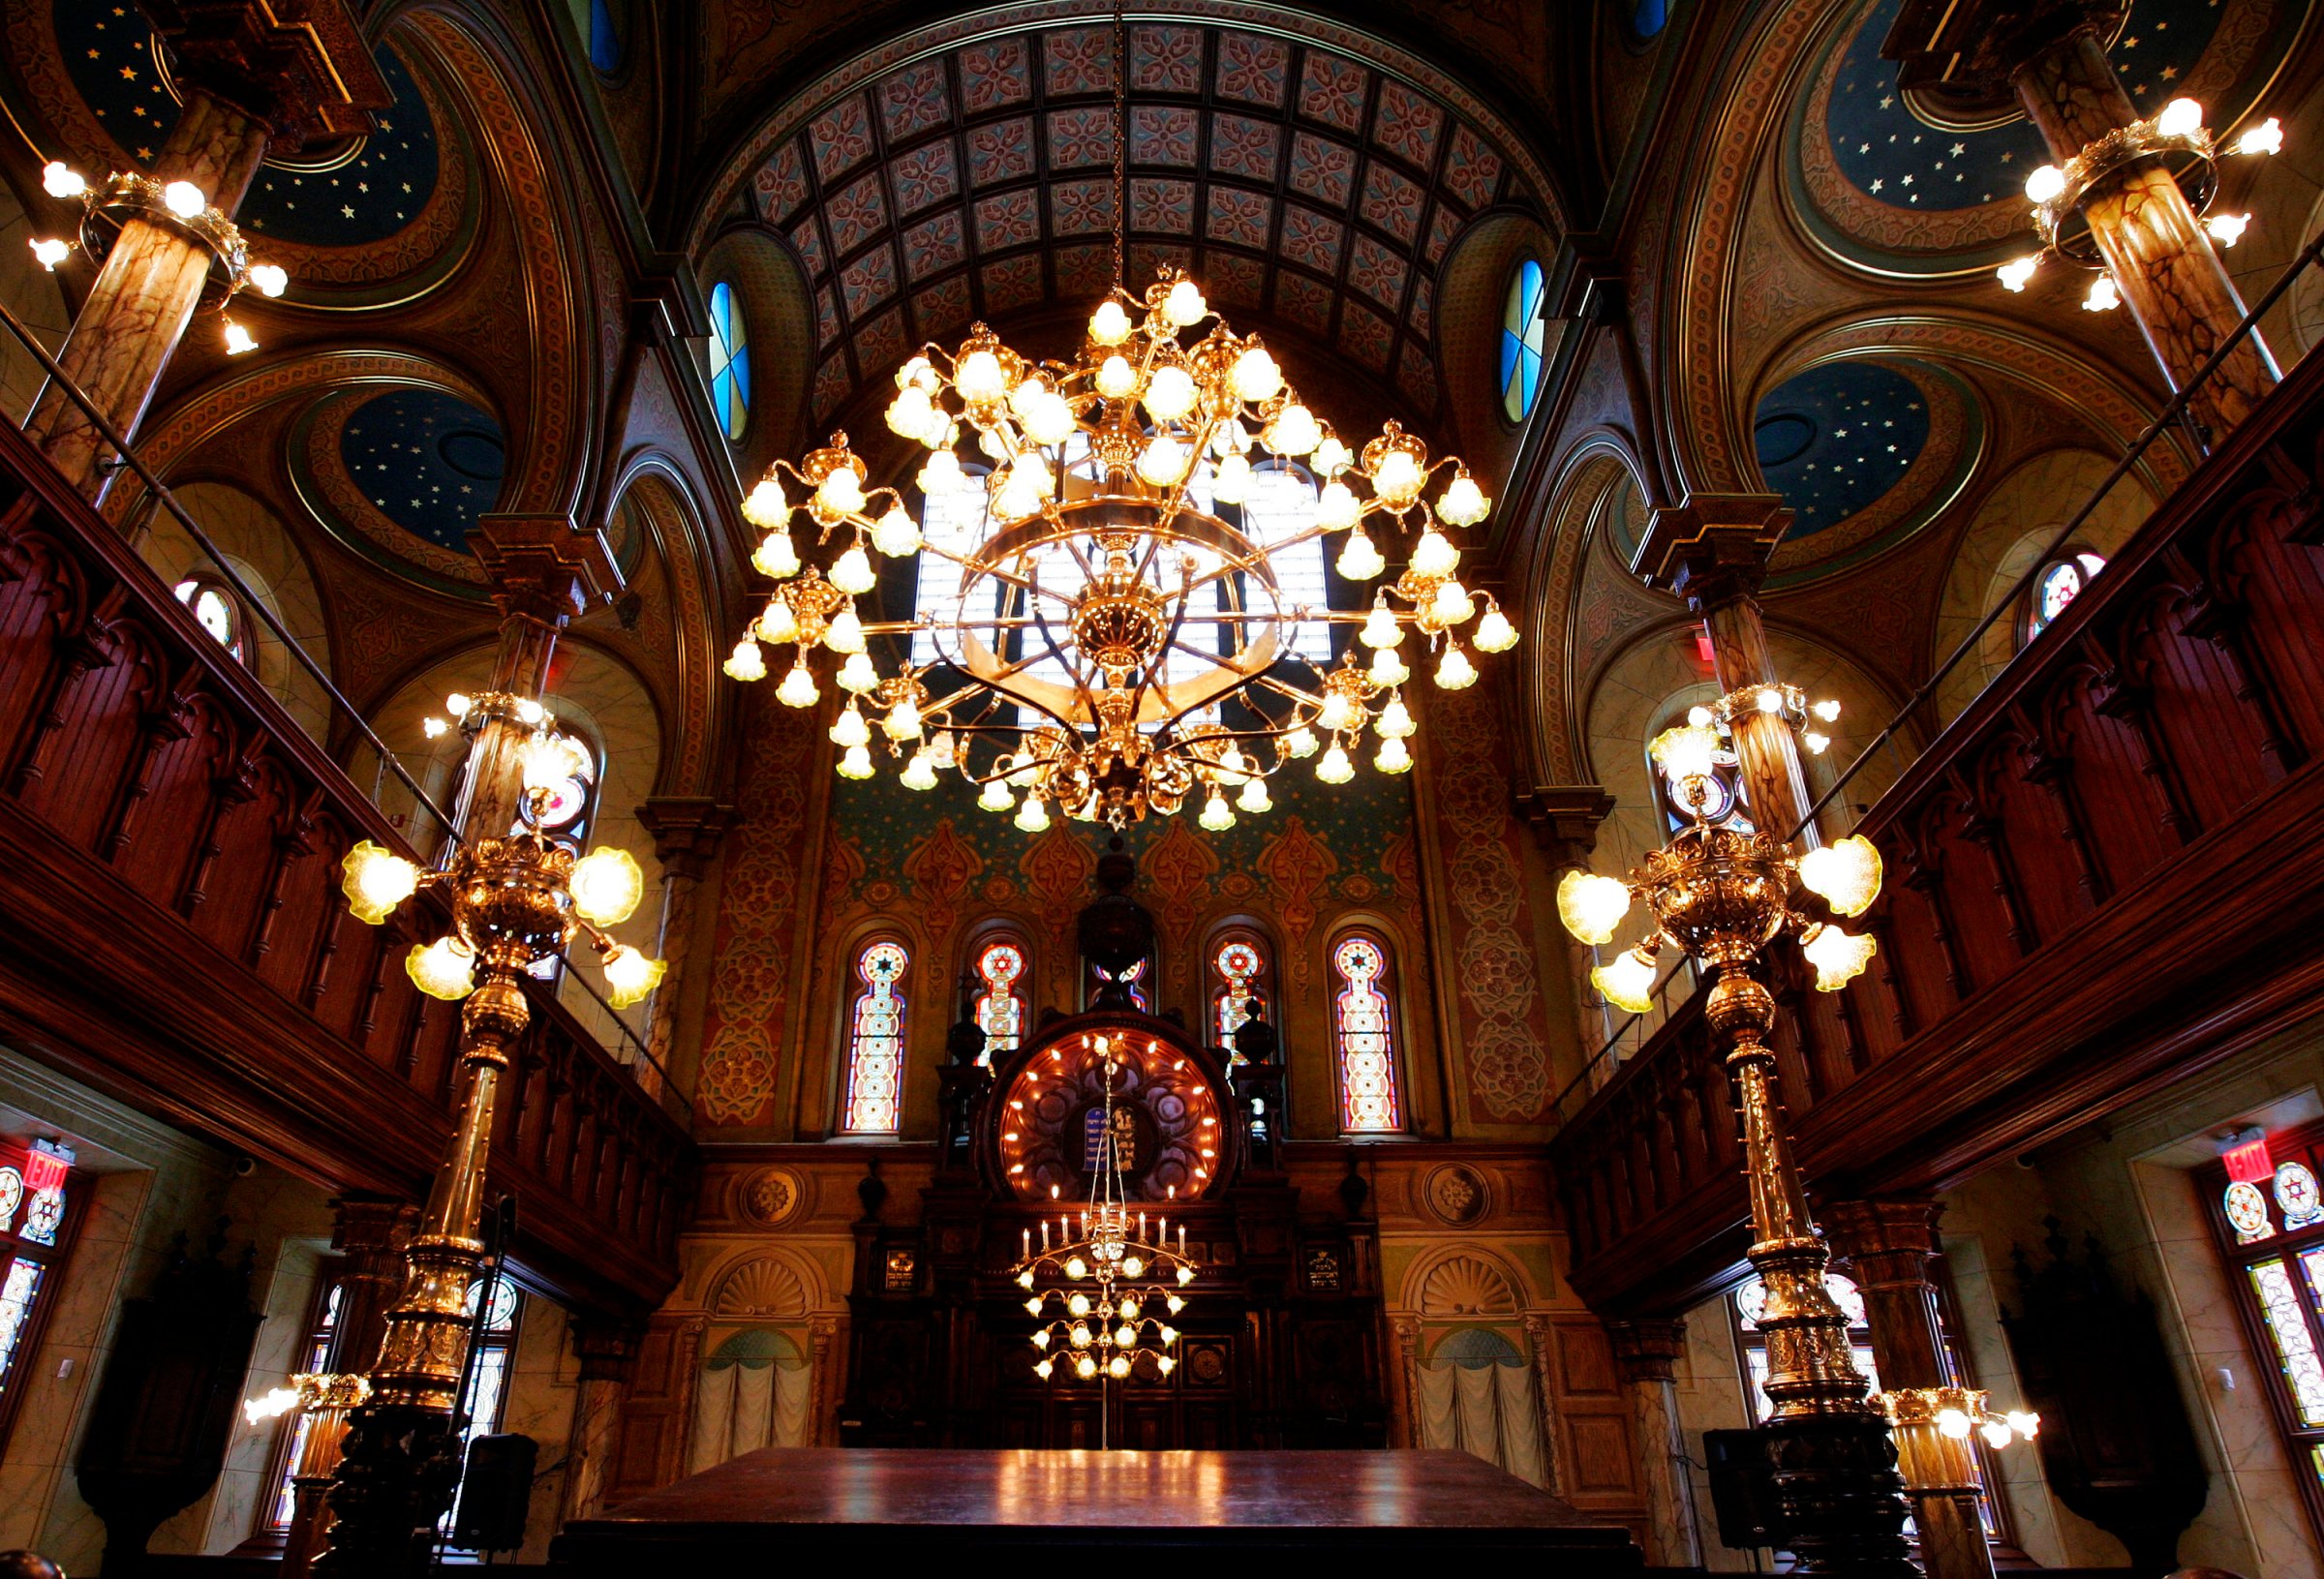 Historic New York City Synagogue Re-Opens Its Doors